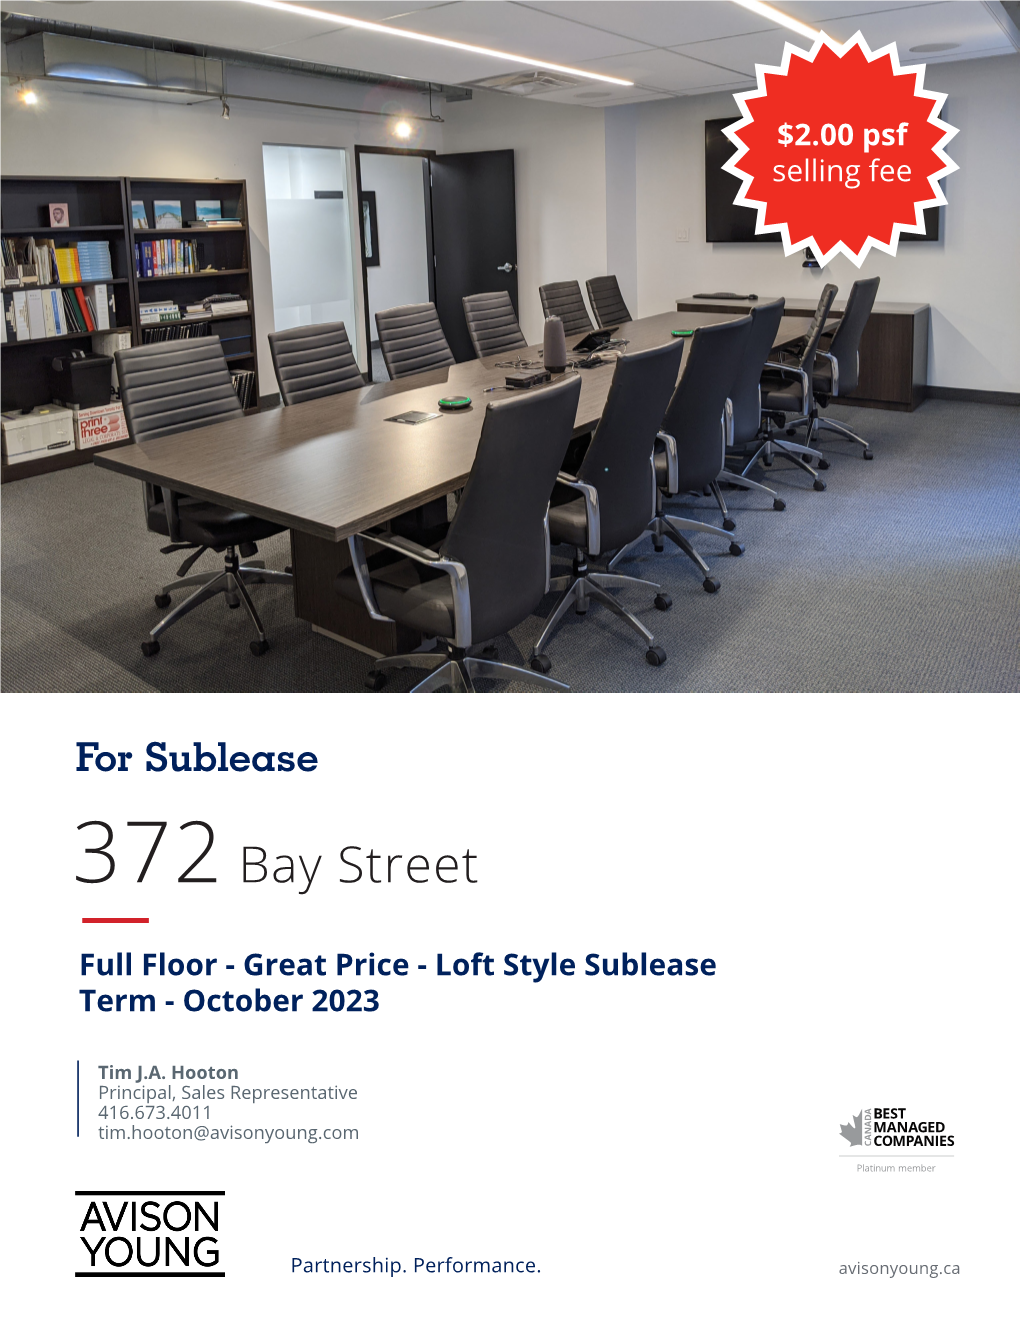 For Sublease